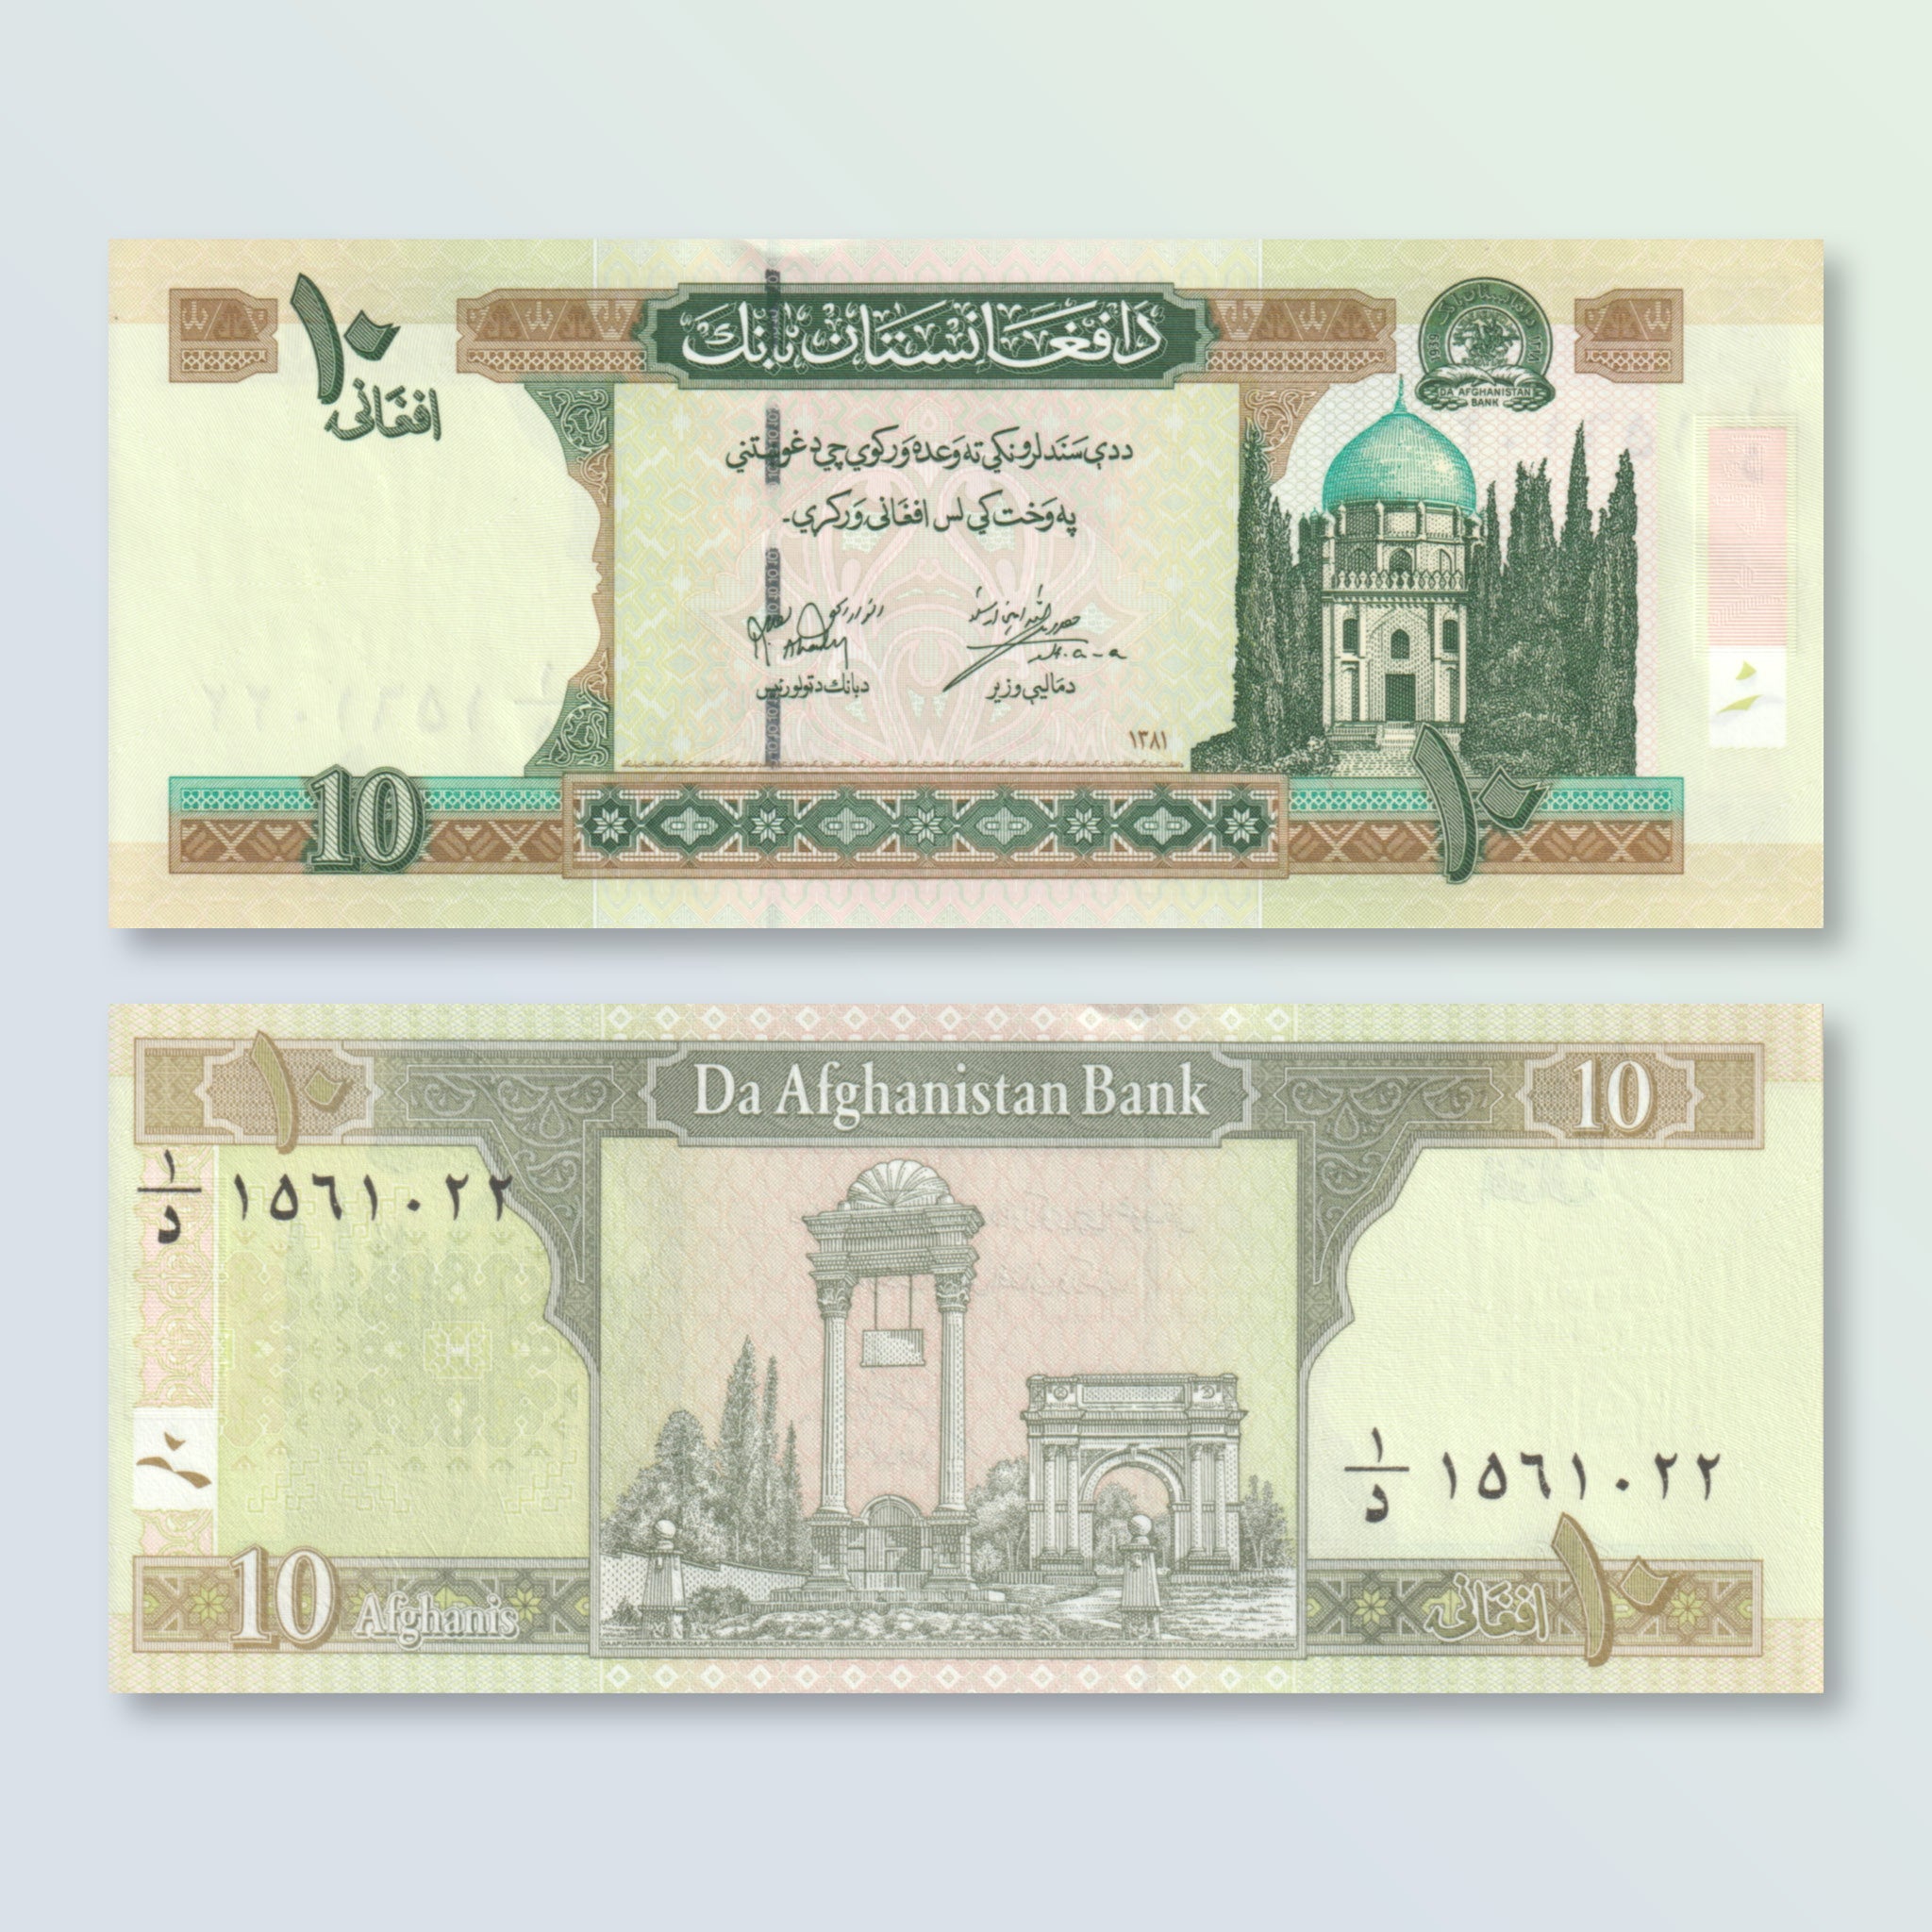 Afghanistan 10 Afghanis, 2002, B351a, P67a, UNC - Robert's World Money - World Banknotes